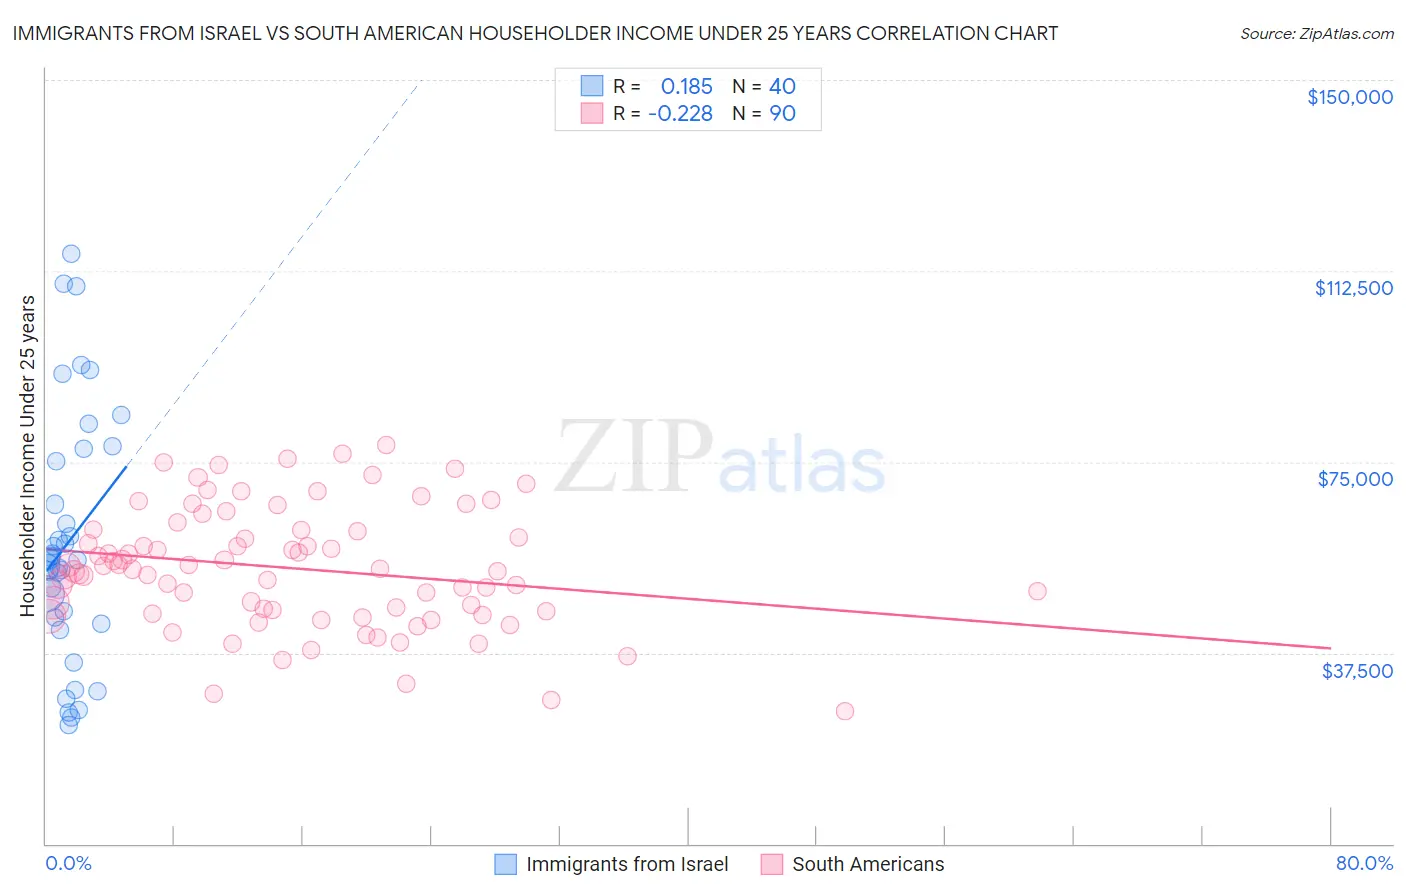 Immigrants from Israel vs South American Householder Income Under 25 years